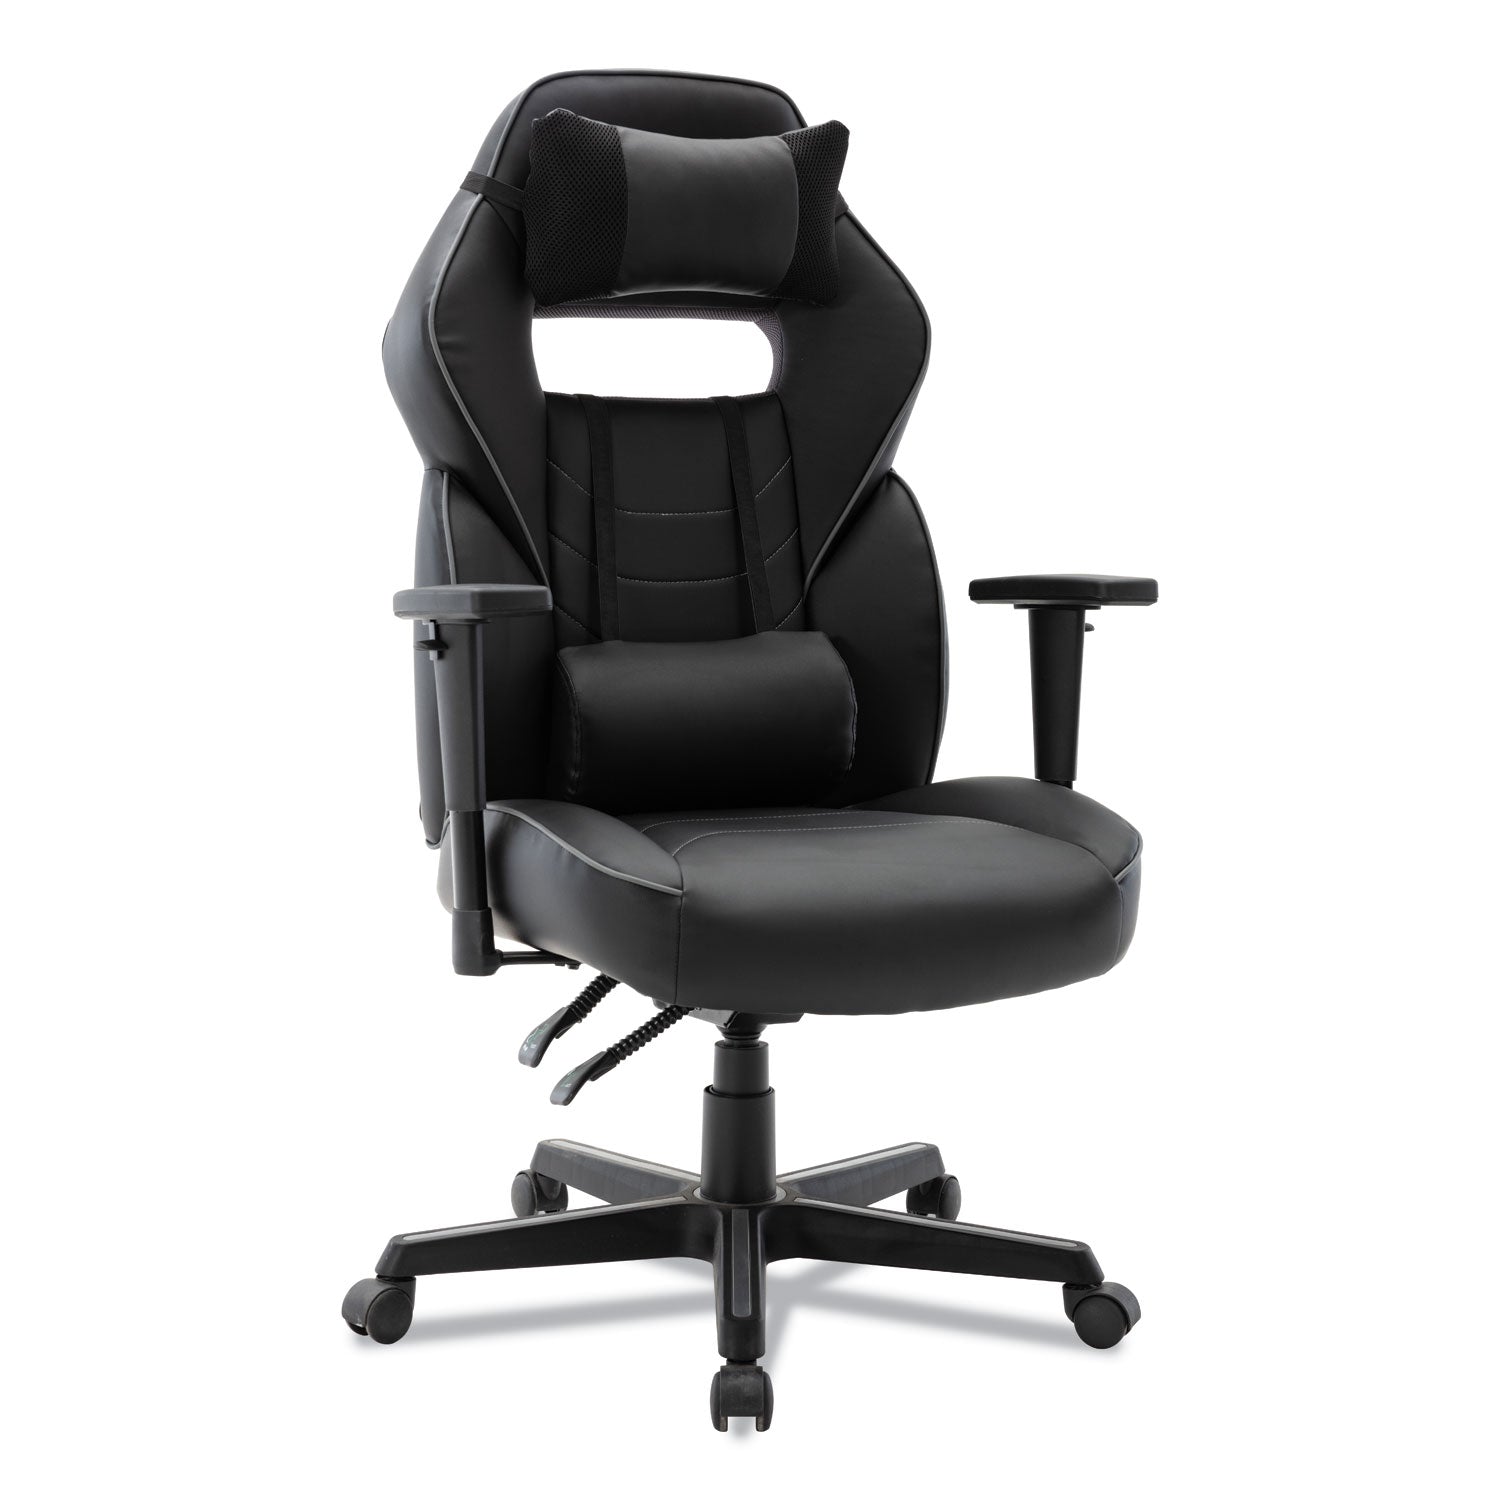 racing-style-ergonomic-gaming-chair-supports-275-lb-1591-to-198-seat-height-black-gray-trim-seat-back-black-gray-base_alegm4146 - 4